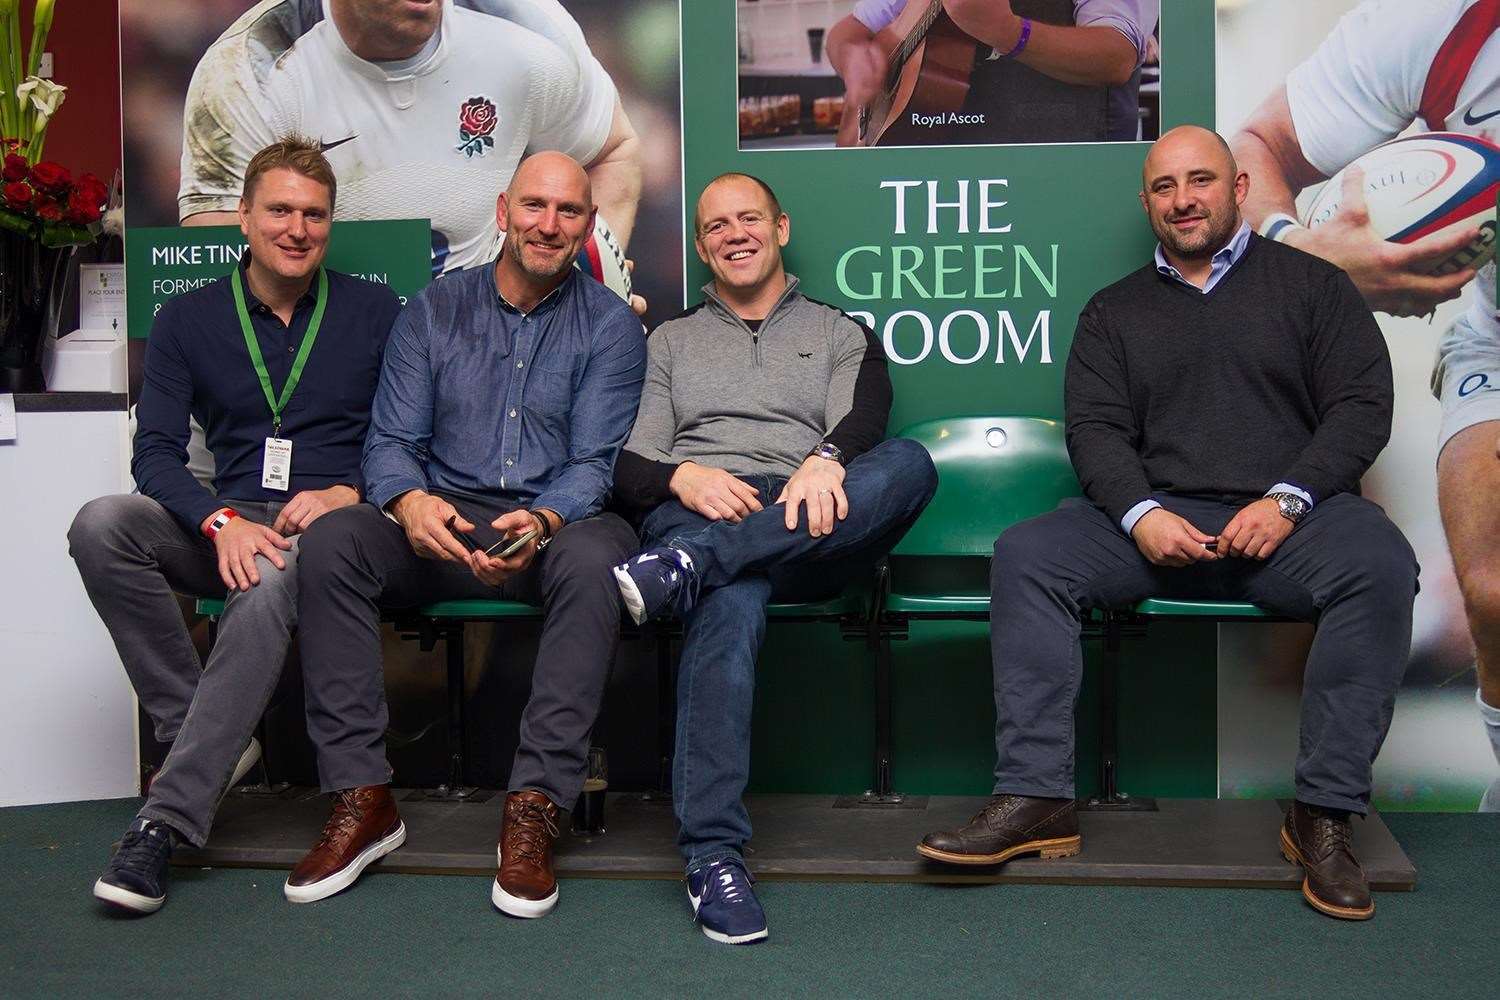 At a corporate event for the England v Argentina match in November, Hospitality Finder managing director Mike Dunderdale, Rugby World Cup winners Lawrence Dallaglio and Mike Tindall and ex-England player and former Maidstone Boys Grammar School pupil David Flatman